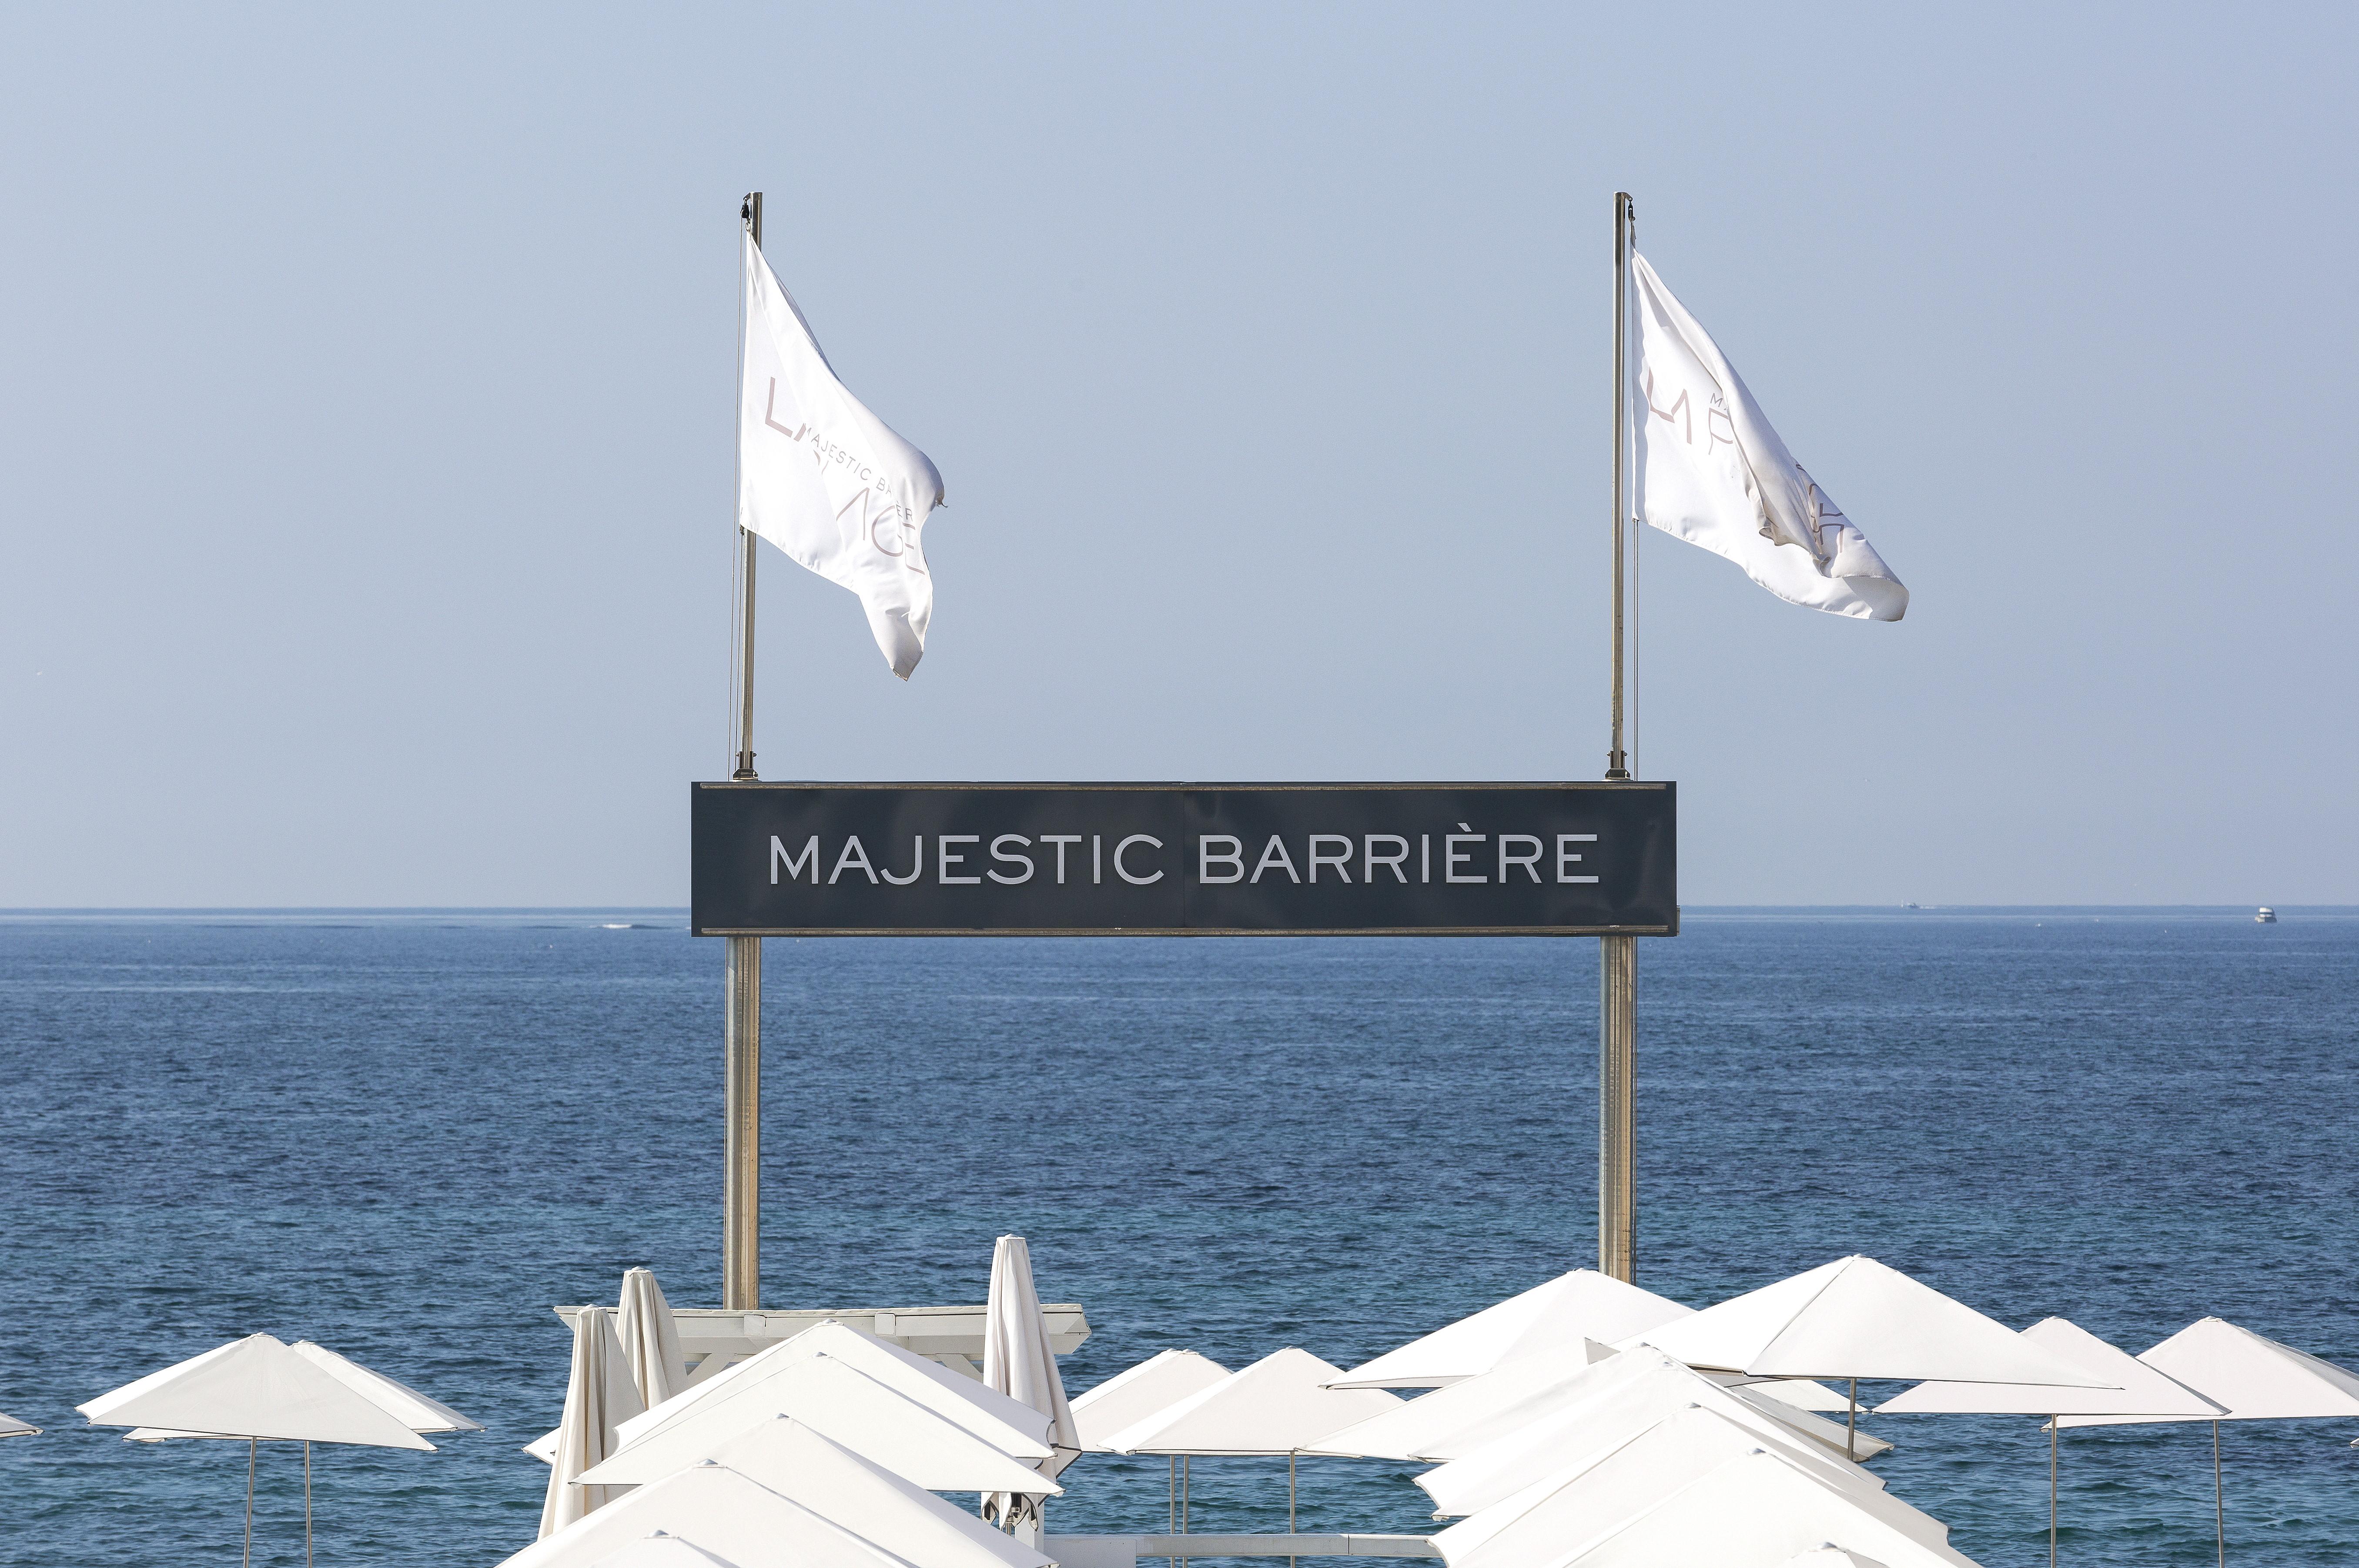 Hotel Barriere Le Majestic Cannes Exterior photo